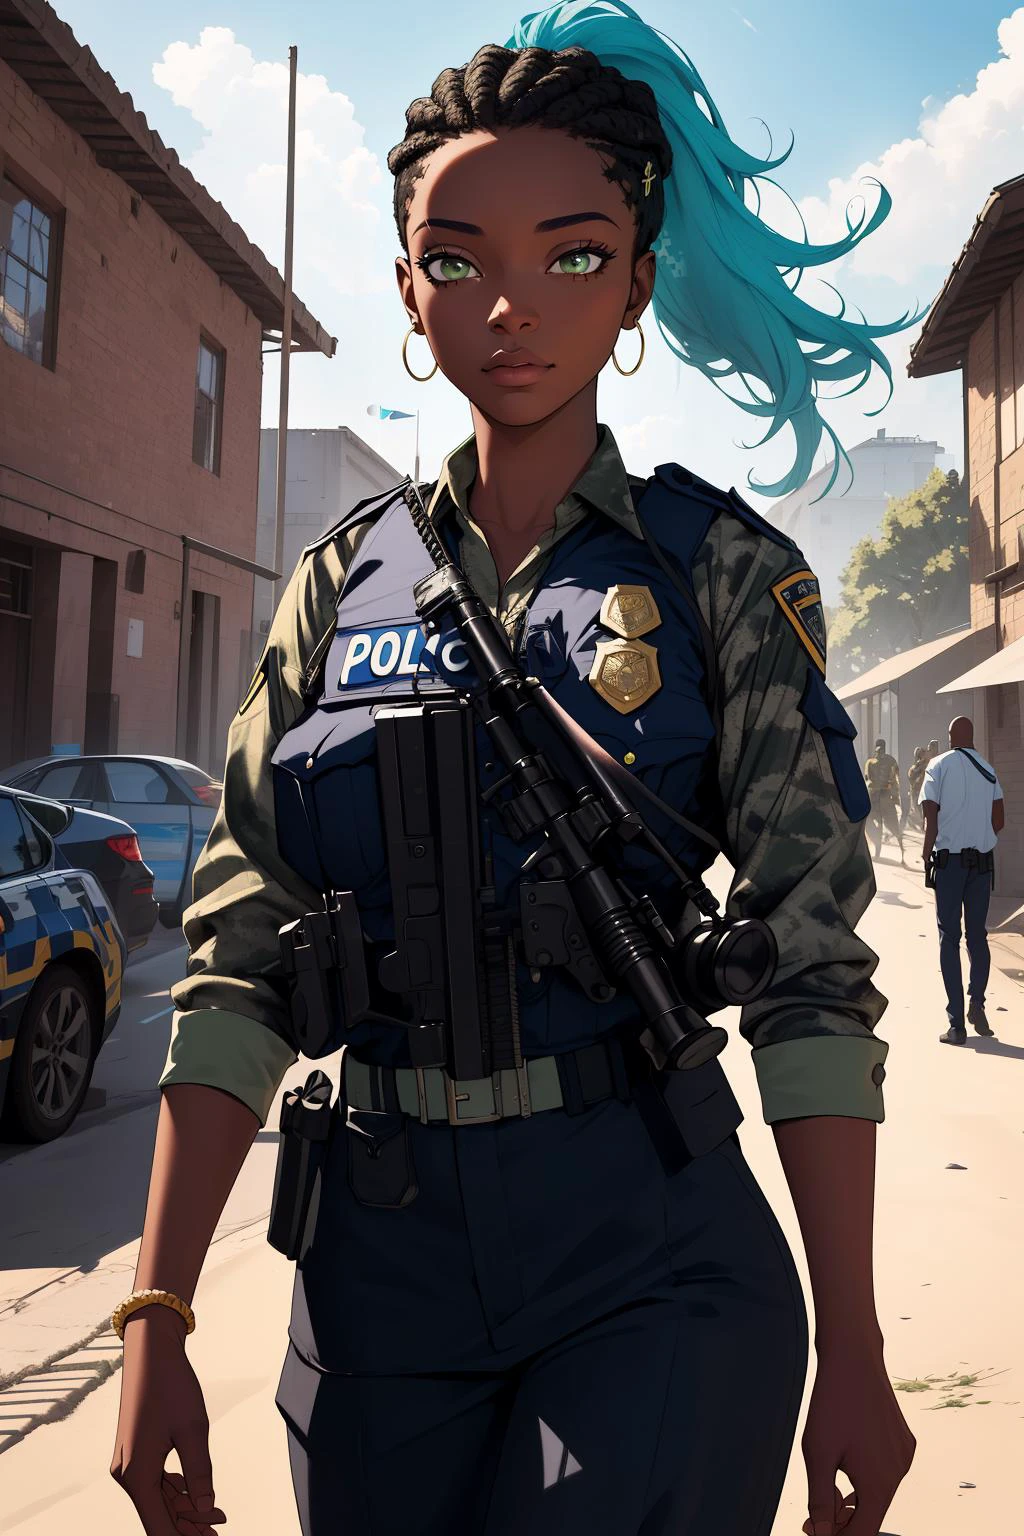 (high quality, best quality, highres, masterpiece:1.2), (futuristic africa, african:1), (1girl, woman, bored face:1.1), (traditional sniper, wearing ghillie suit:1), (aqua_hair, long_hair, high_ponytail:1), (constricted_pupils:1), (entering idyllic police station:1.1), (perfect, dazzling, detailed:1.4)